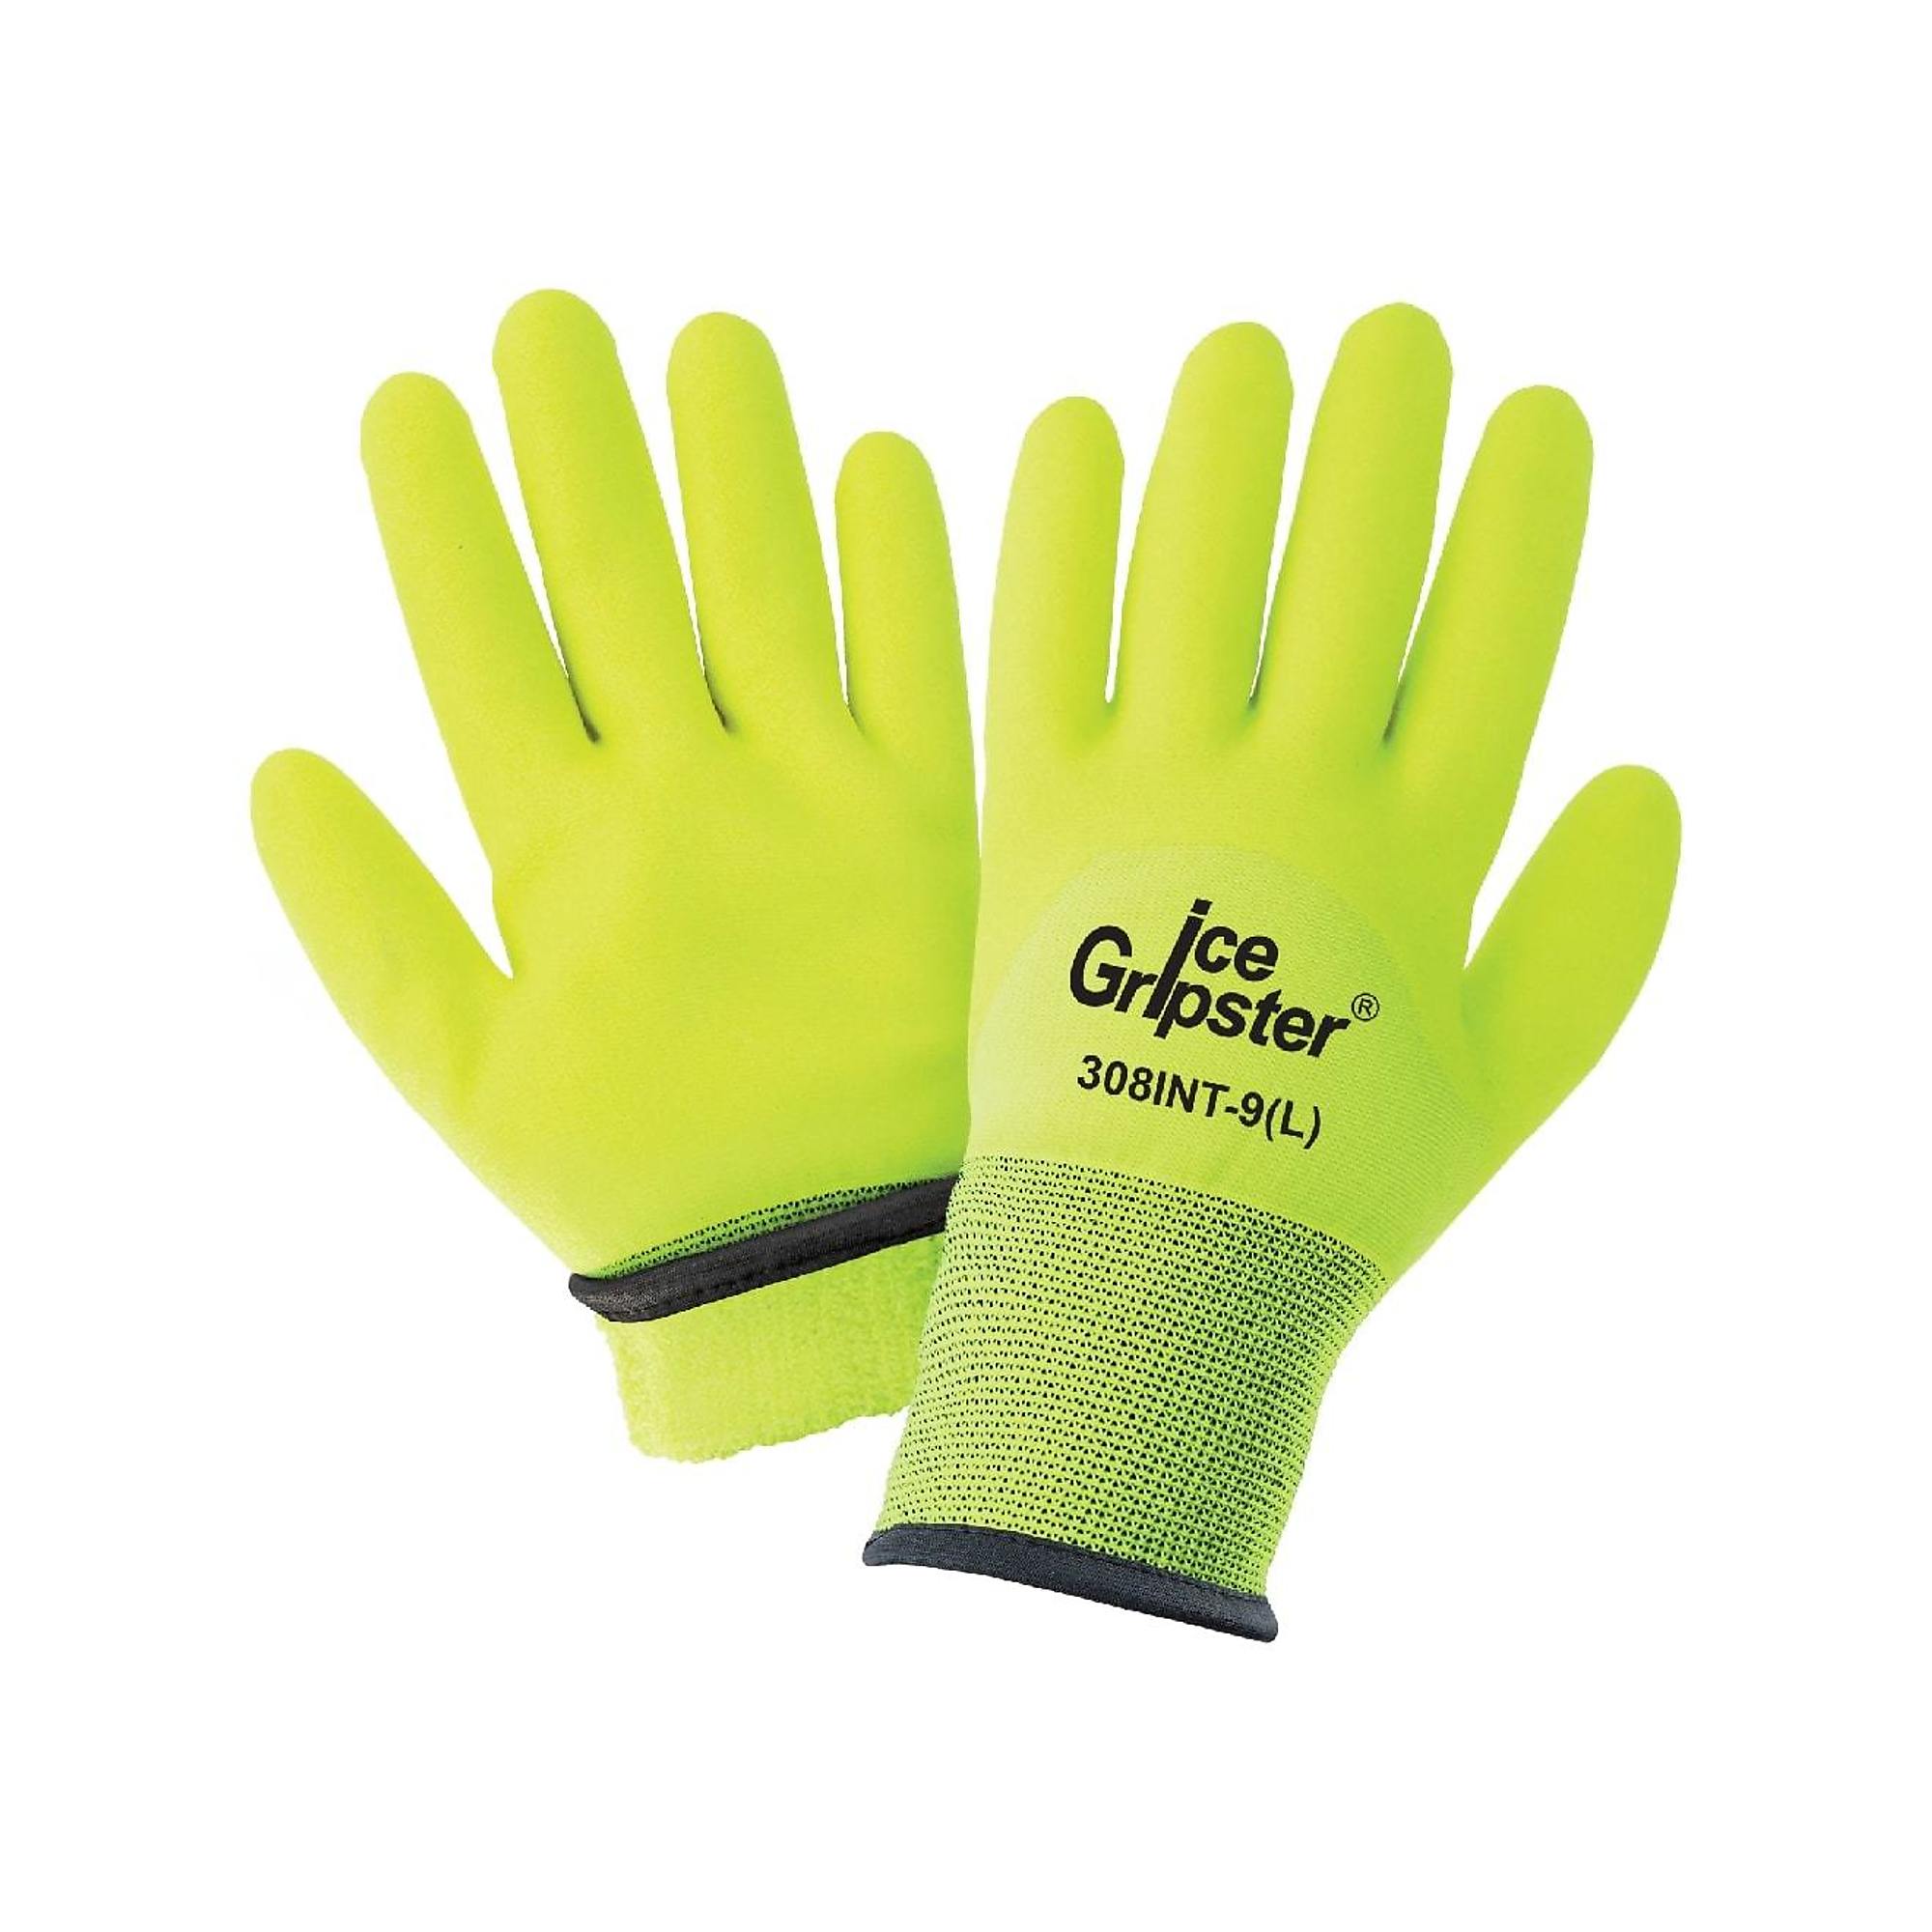 Global Glove Ice Gripster , HV Yel, Insulated, PVC Dip,Cut Resistant A2 Gloves- 12 Pairs, Size M, Color High Visibility Yellow/Green, Included (qty.)